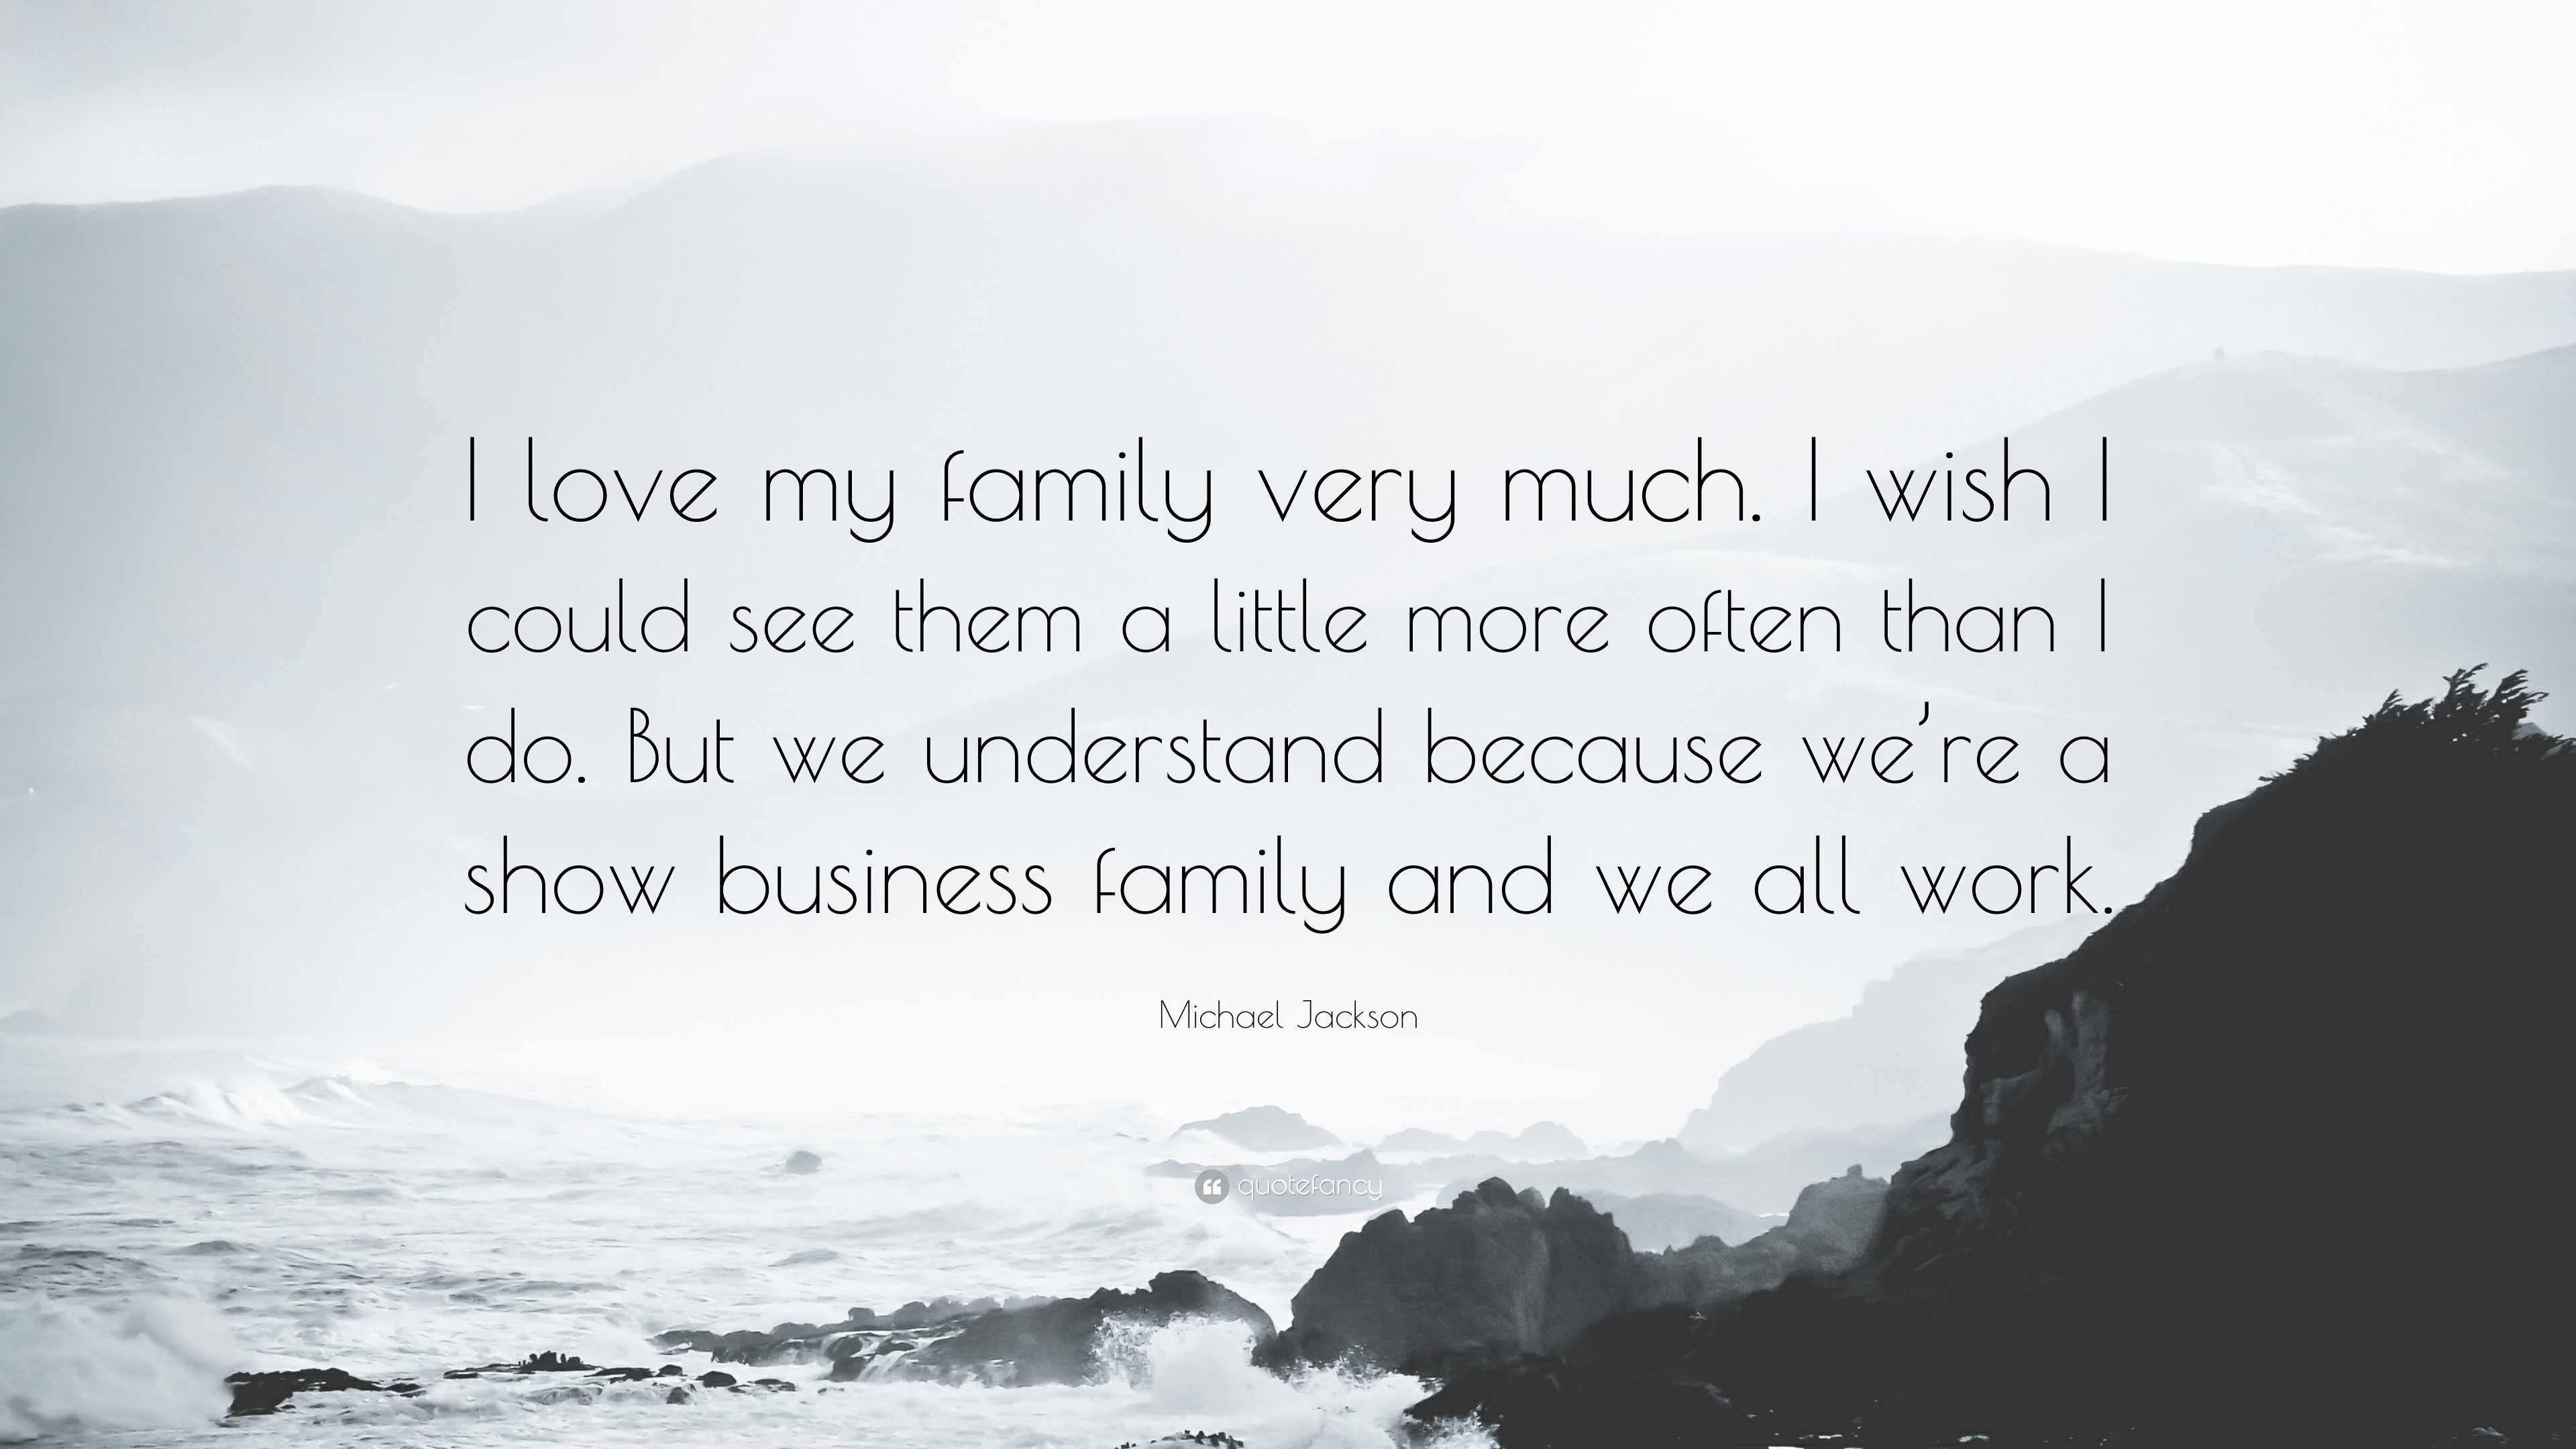 3840x2160 Michael Jackson Quote: “I love my family very much. I wish I could